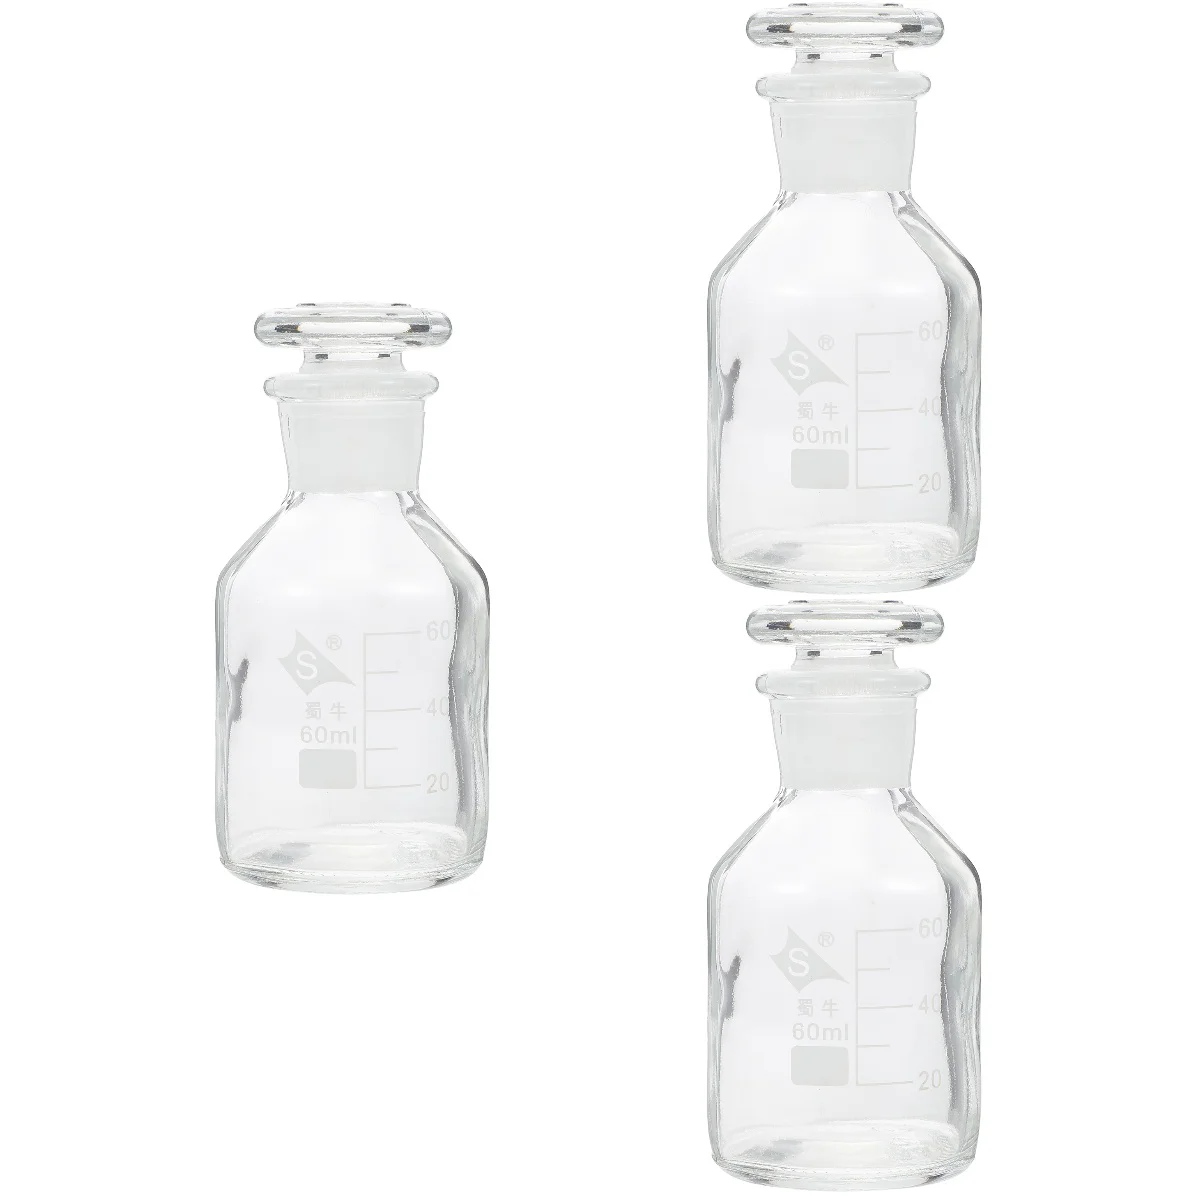 

Bottle Reagent Bottles Mouth Wide Sample Laboratory Apothecary Clear Decorative Acid Jars 60Ml Dropper Jar Chemistry Equipment